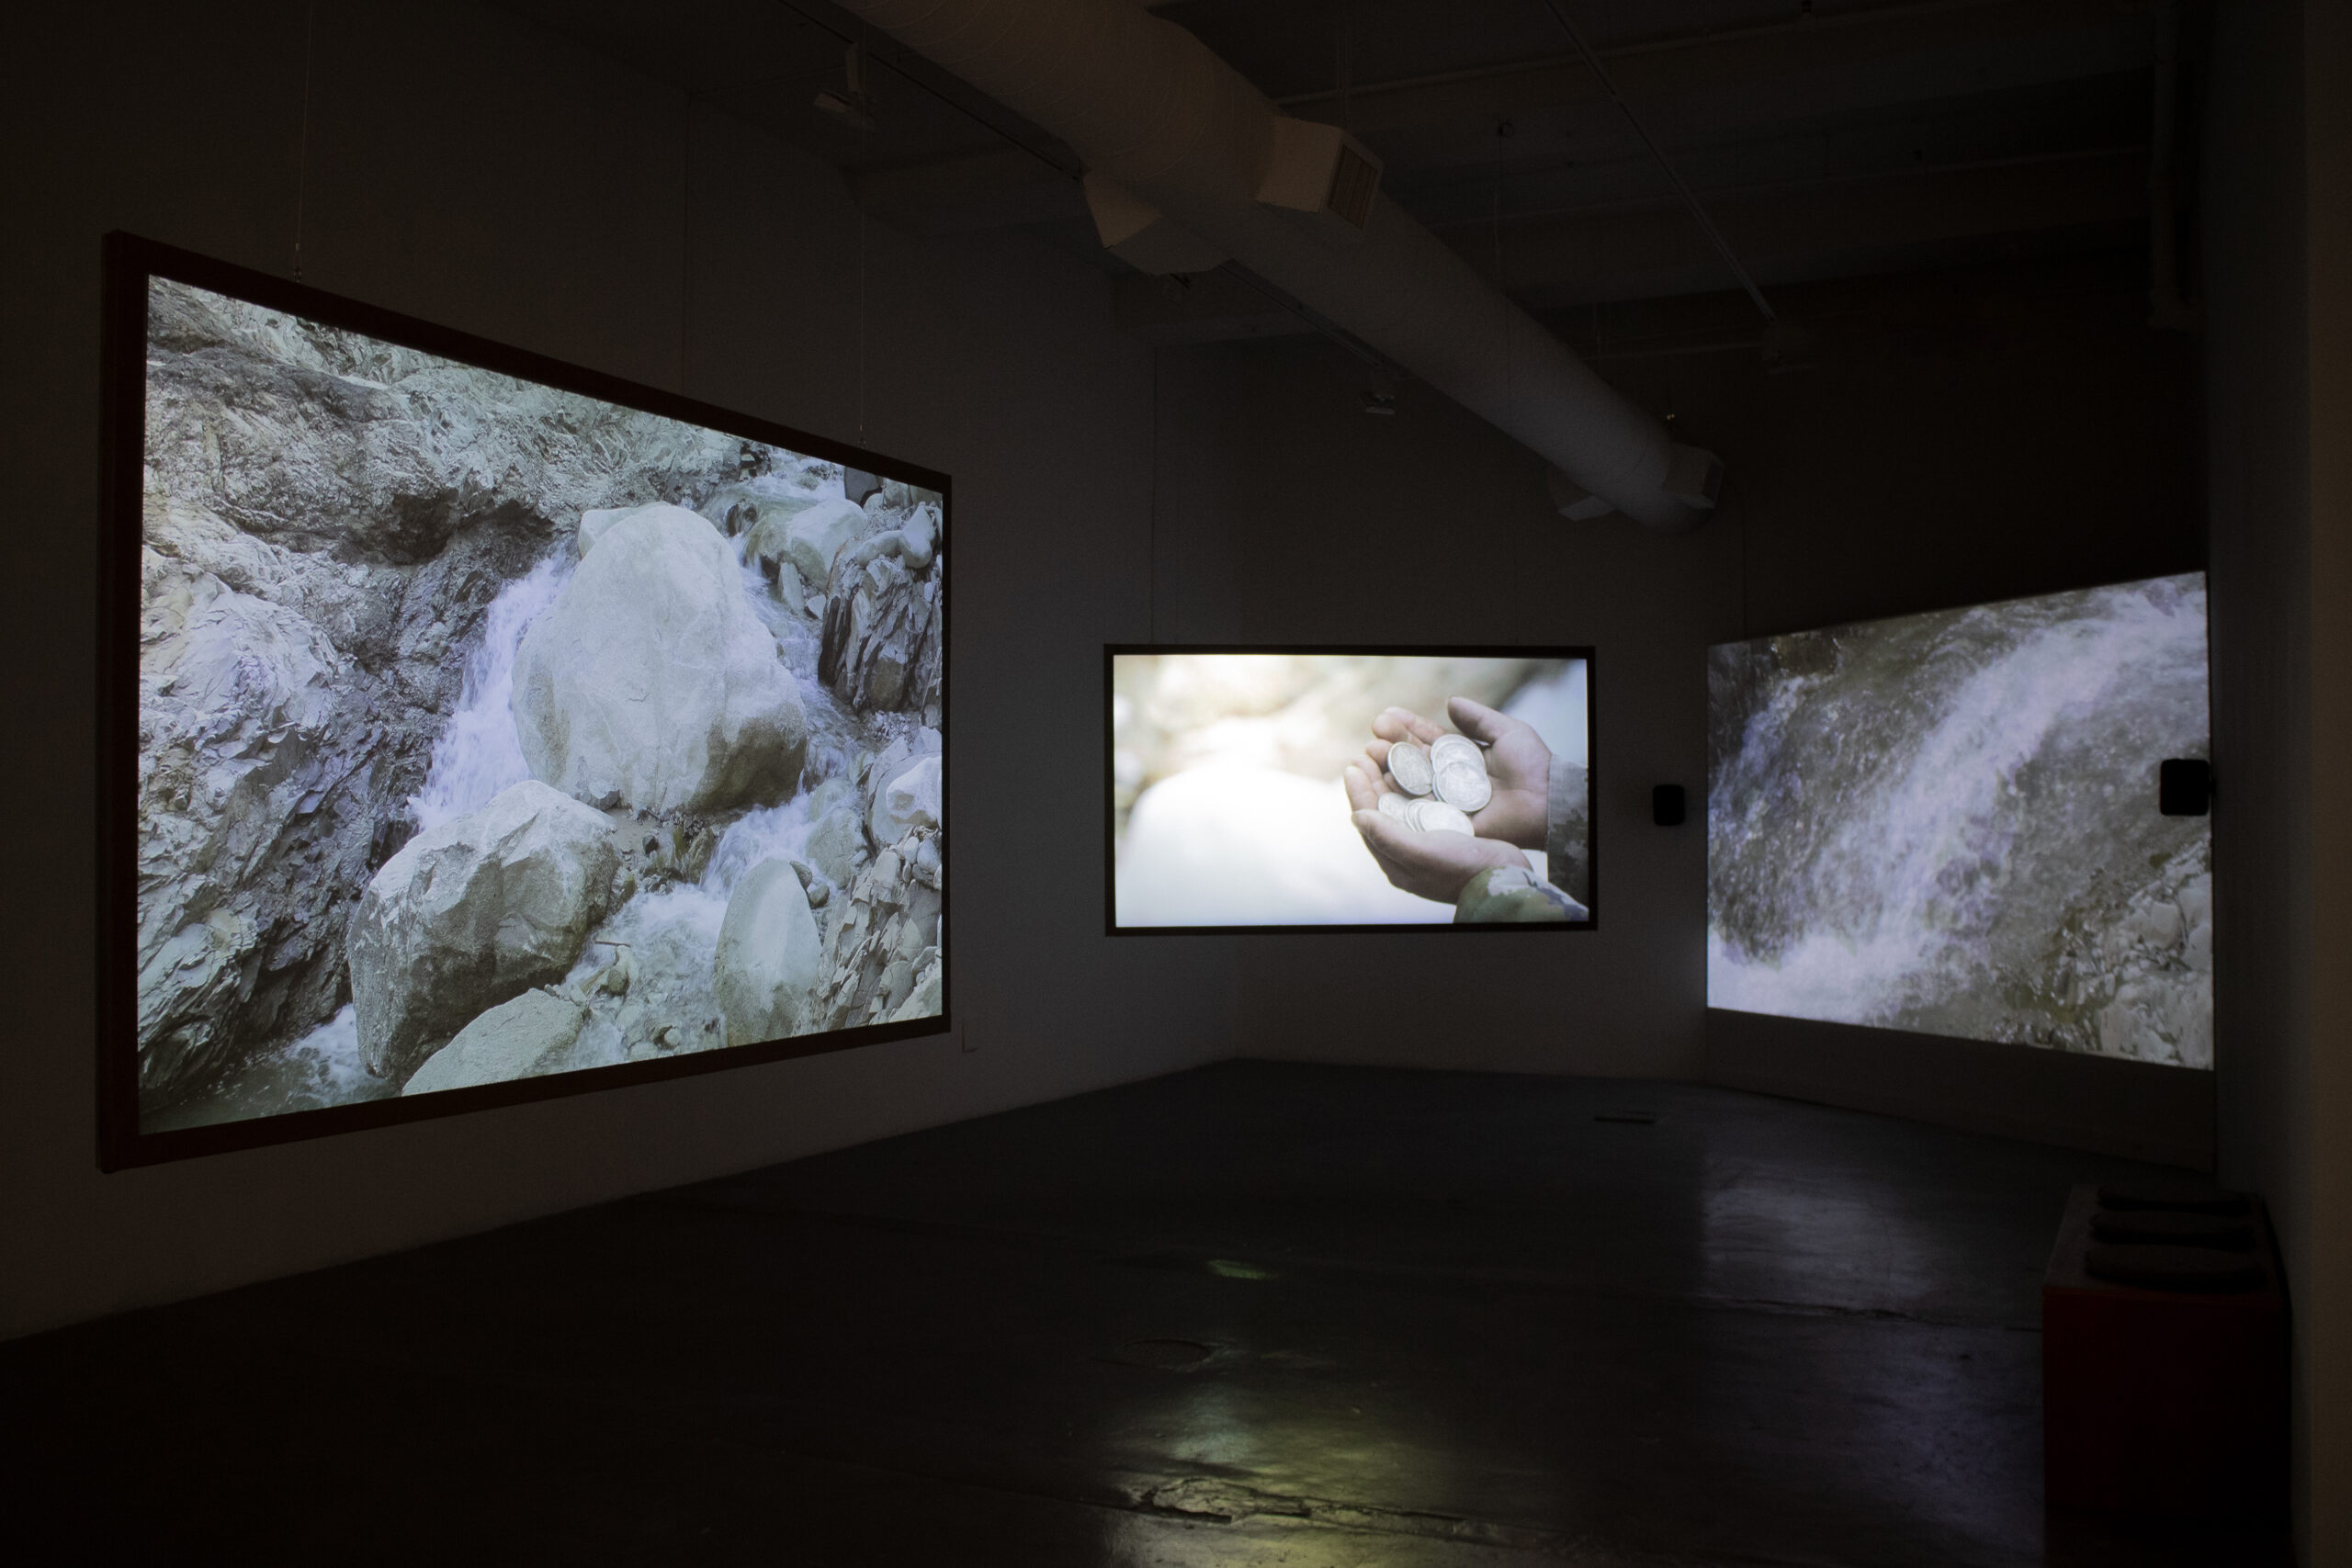 A dark gallery with three screens. From left to right, a stream over rocks, two hands cupped together holding silver coins, and another stream.